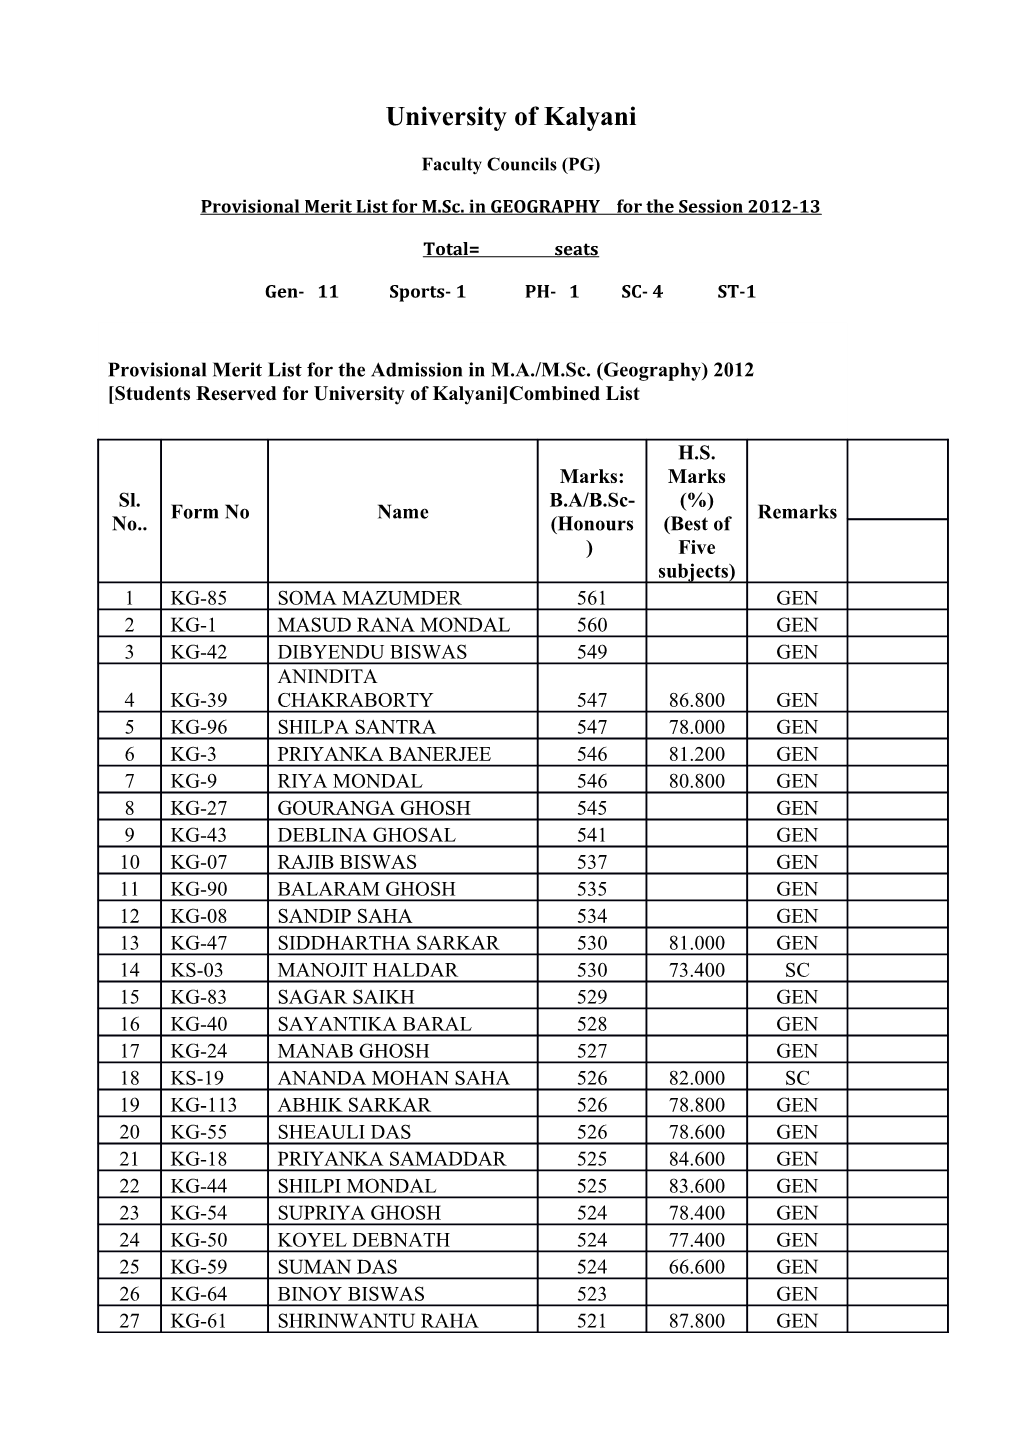 Provisional Merit List for M.Sc. in GEOGRAPHY for the Session 2012-13